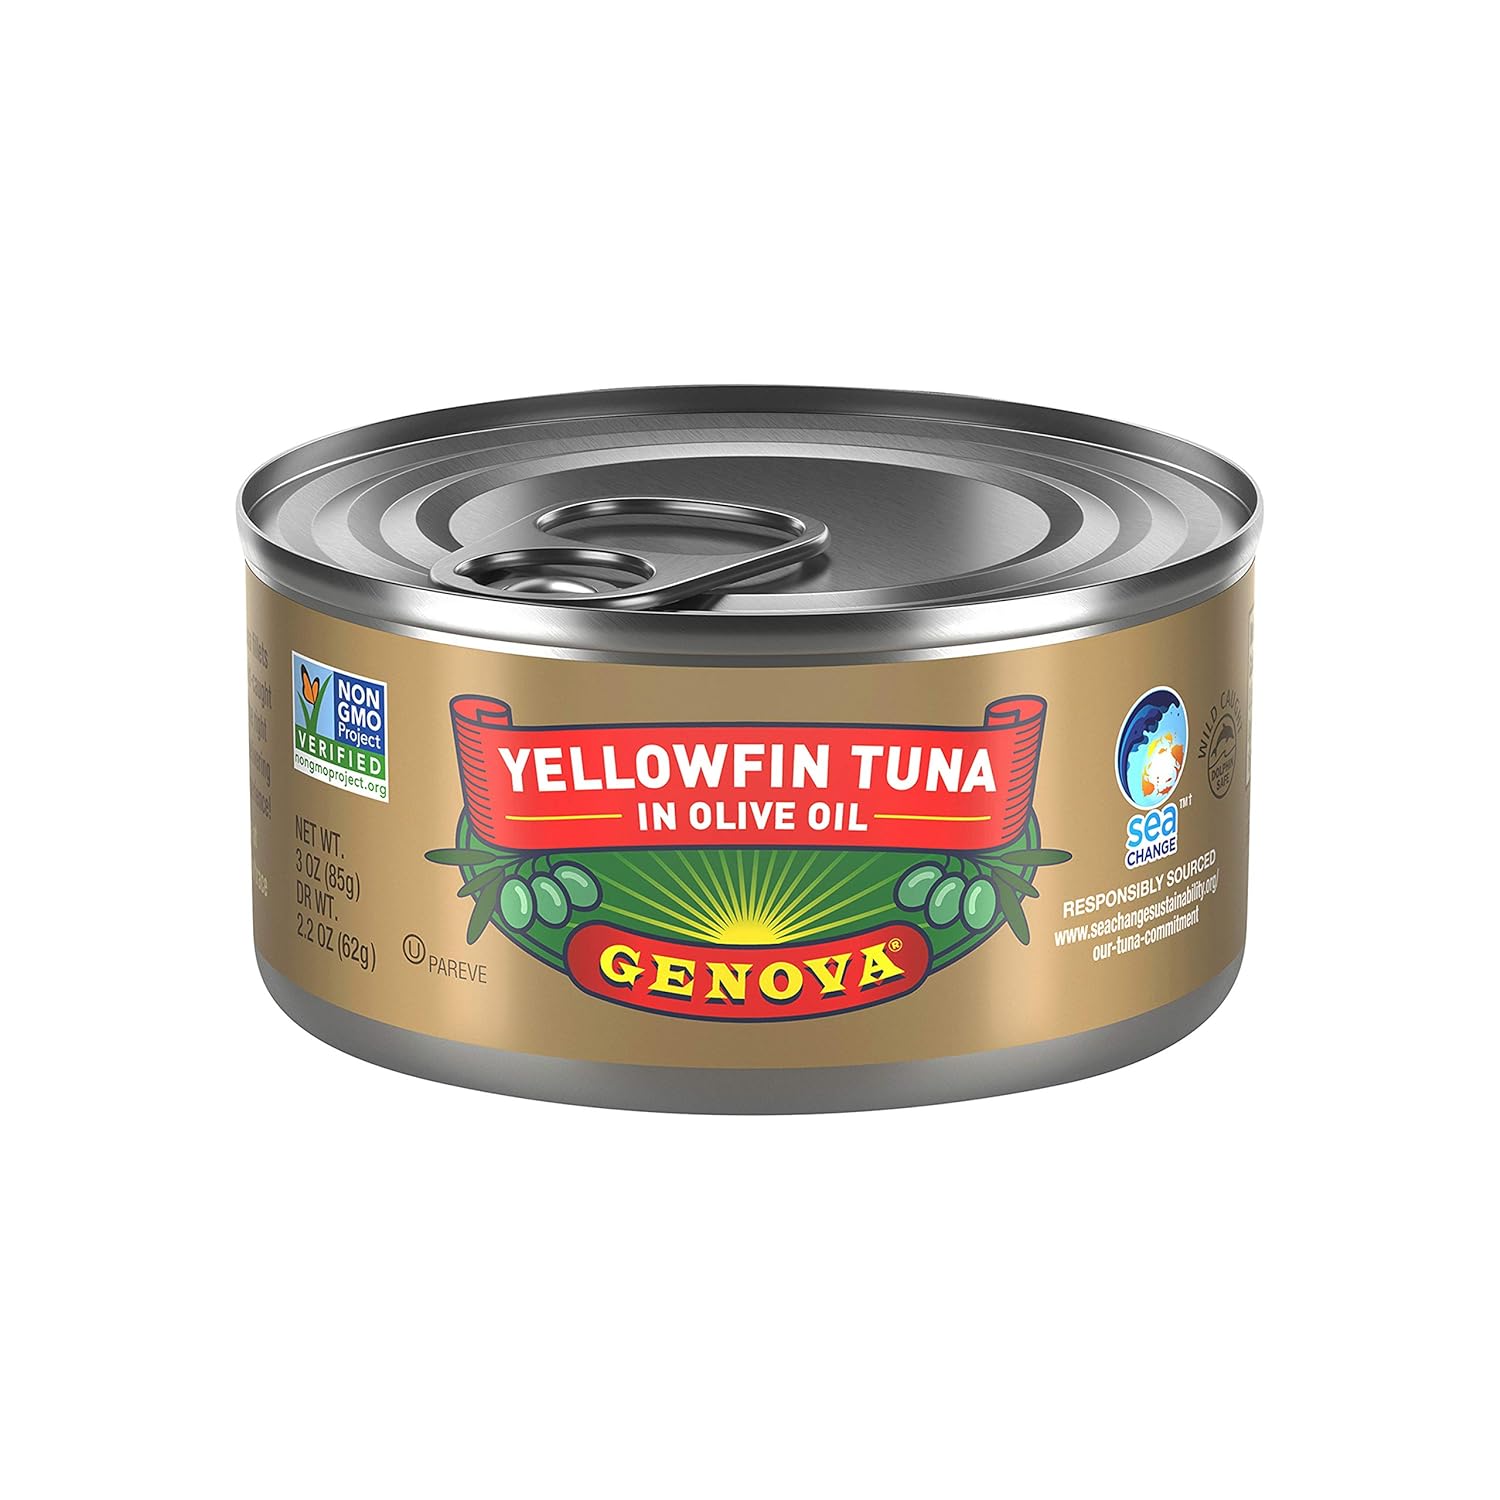 Genova Premium Yellowfin Tuna in Olive Oil, Wild Caught, Solid Light, 3 oz. Can (Pack of 8)